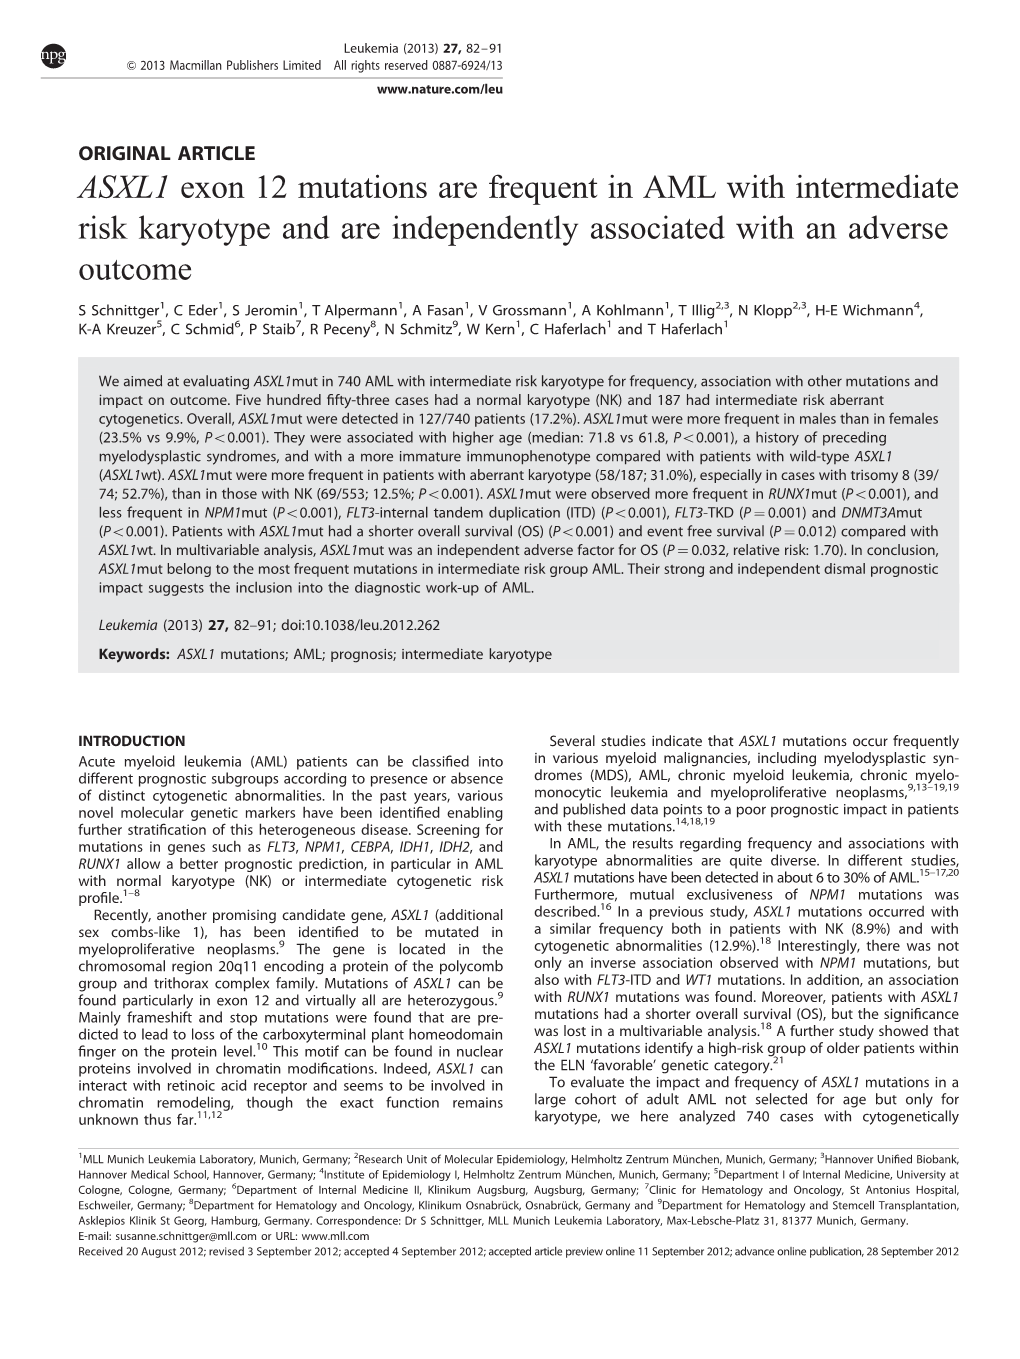 ASXL1 Exon 12 Mutations Are Frequent in AML with Intermediate Risk Karyotype and Are Independently Associated with an Adverse Outcome